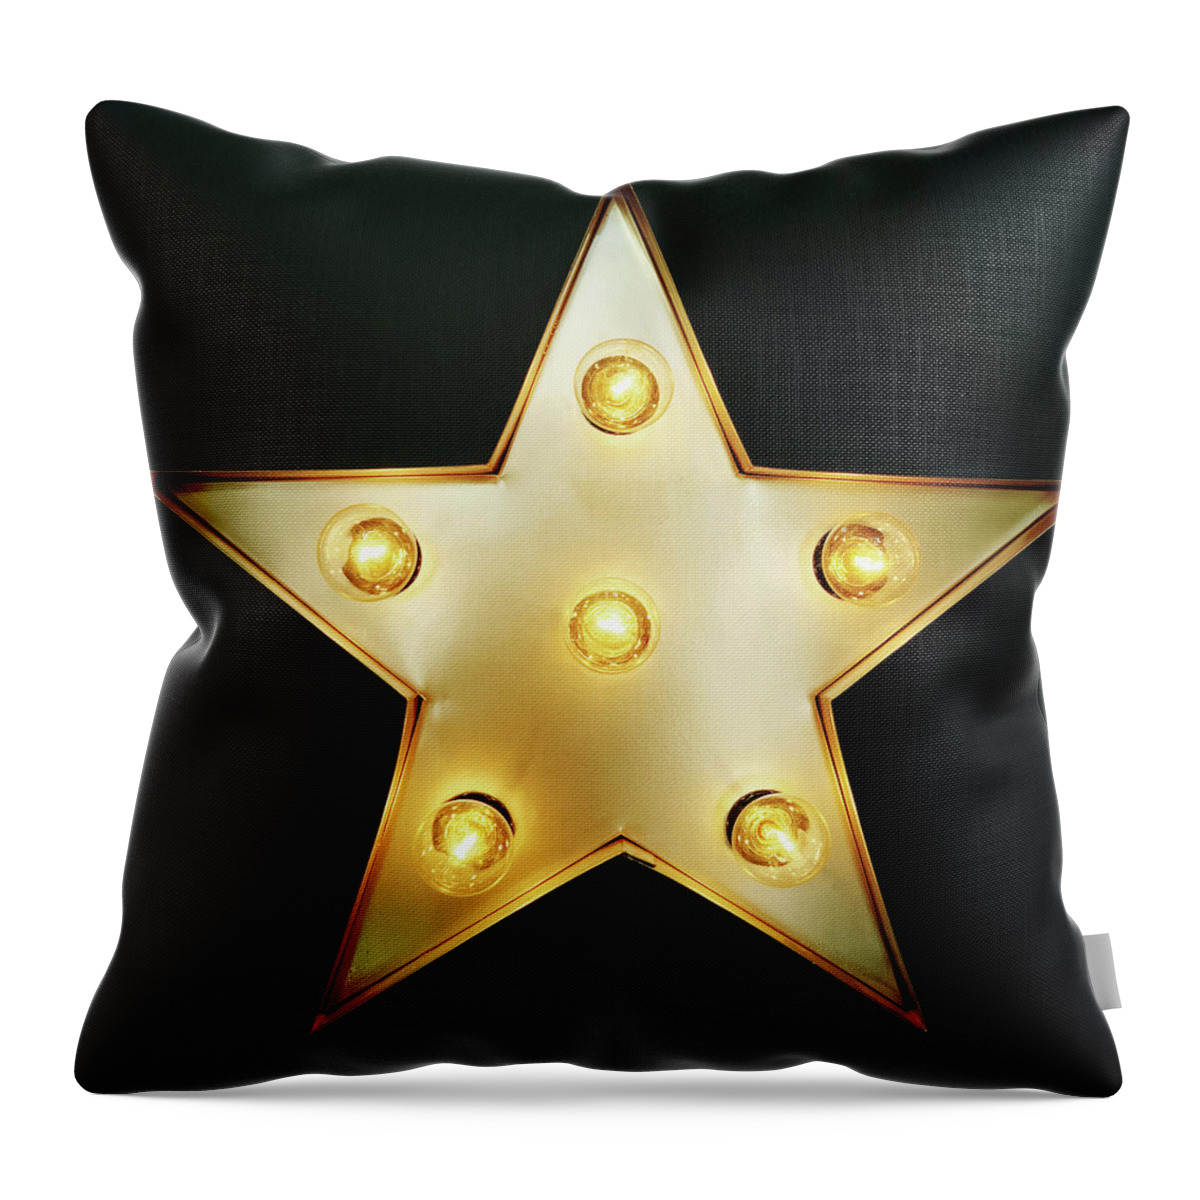 Star Throw Pillow featuring the photograph Decorative star with light bulbs by GoodMood Art